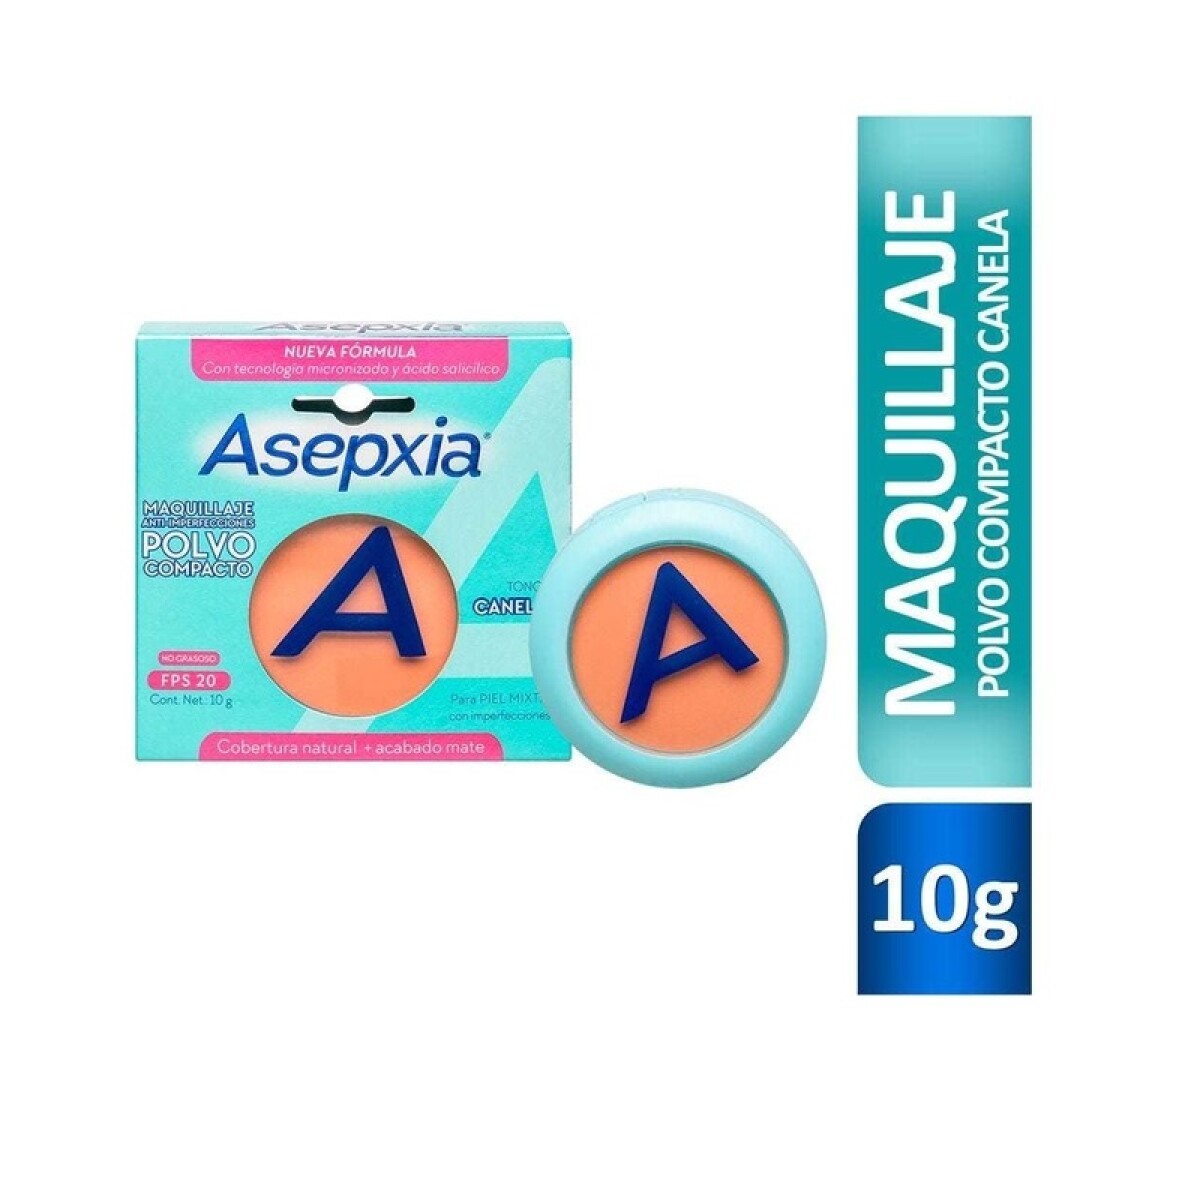 Maquillaje Asepxia Polvo 10 Grs. - Canela 